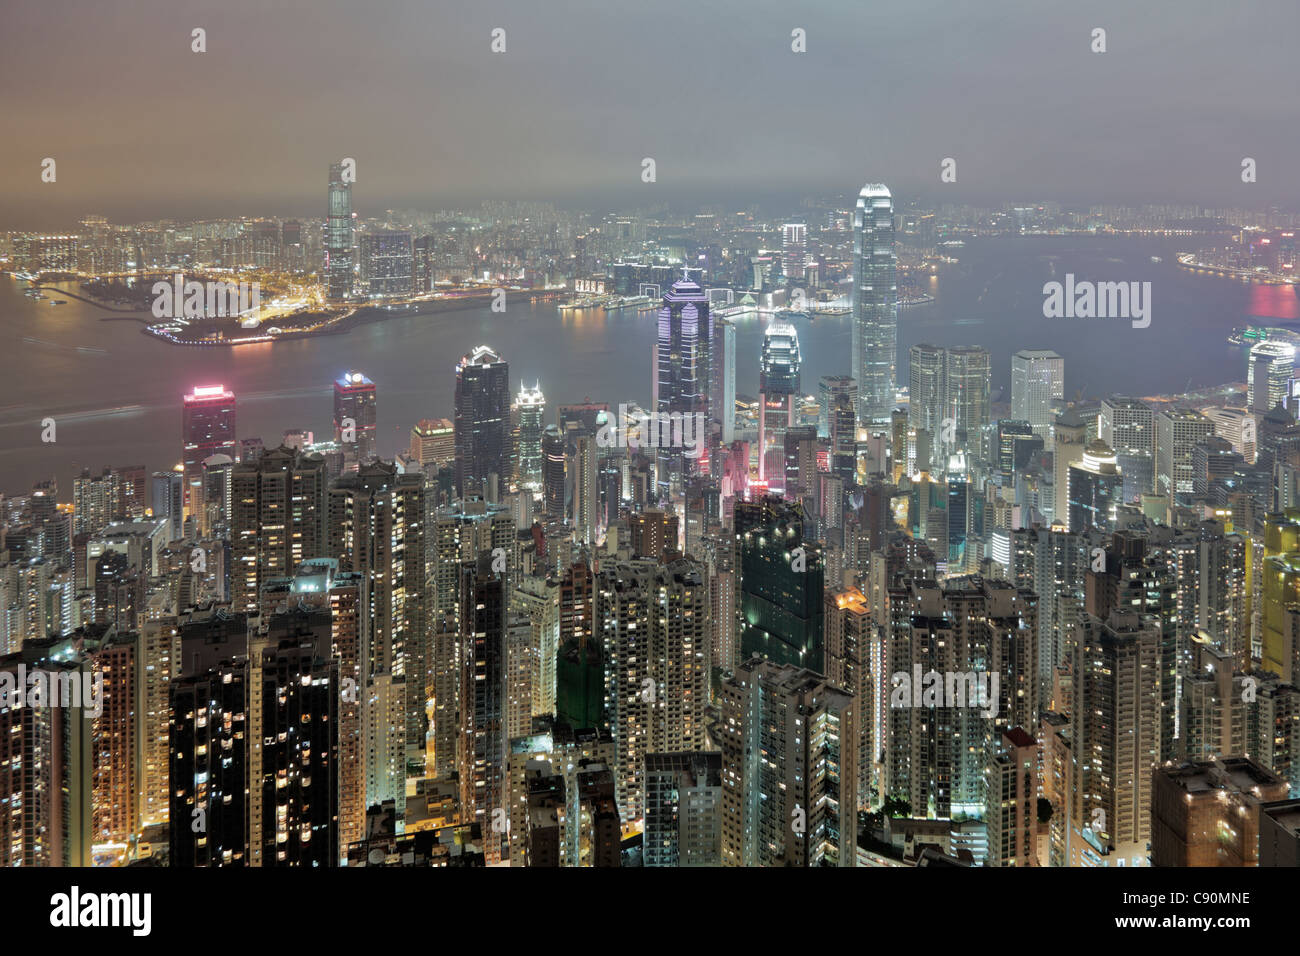 View of Hong Kong from Victoria Peak towards Victoria Harbour and the illuminated skyscrapers at night, Hong Kong, China Stock Photo